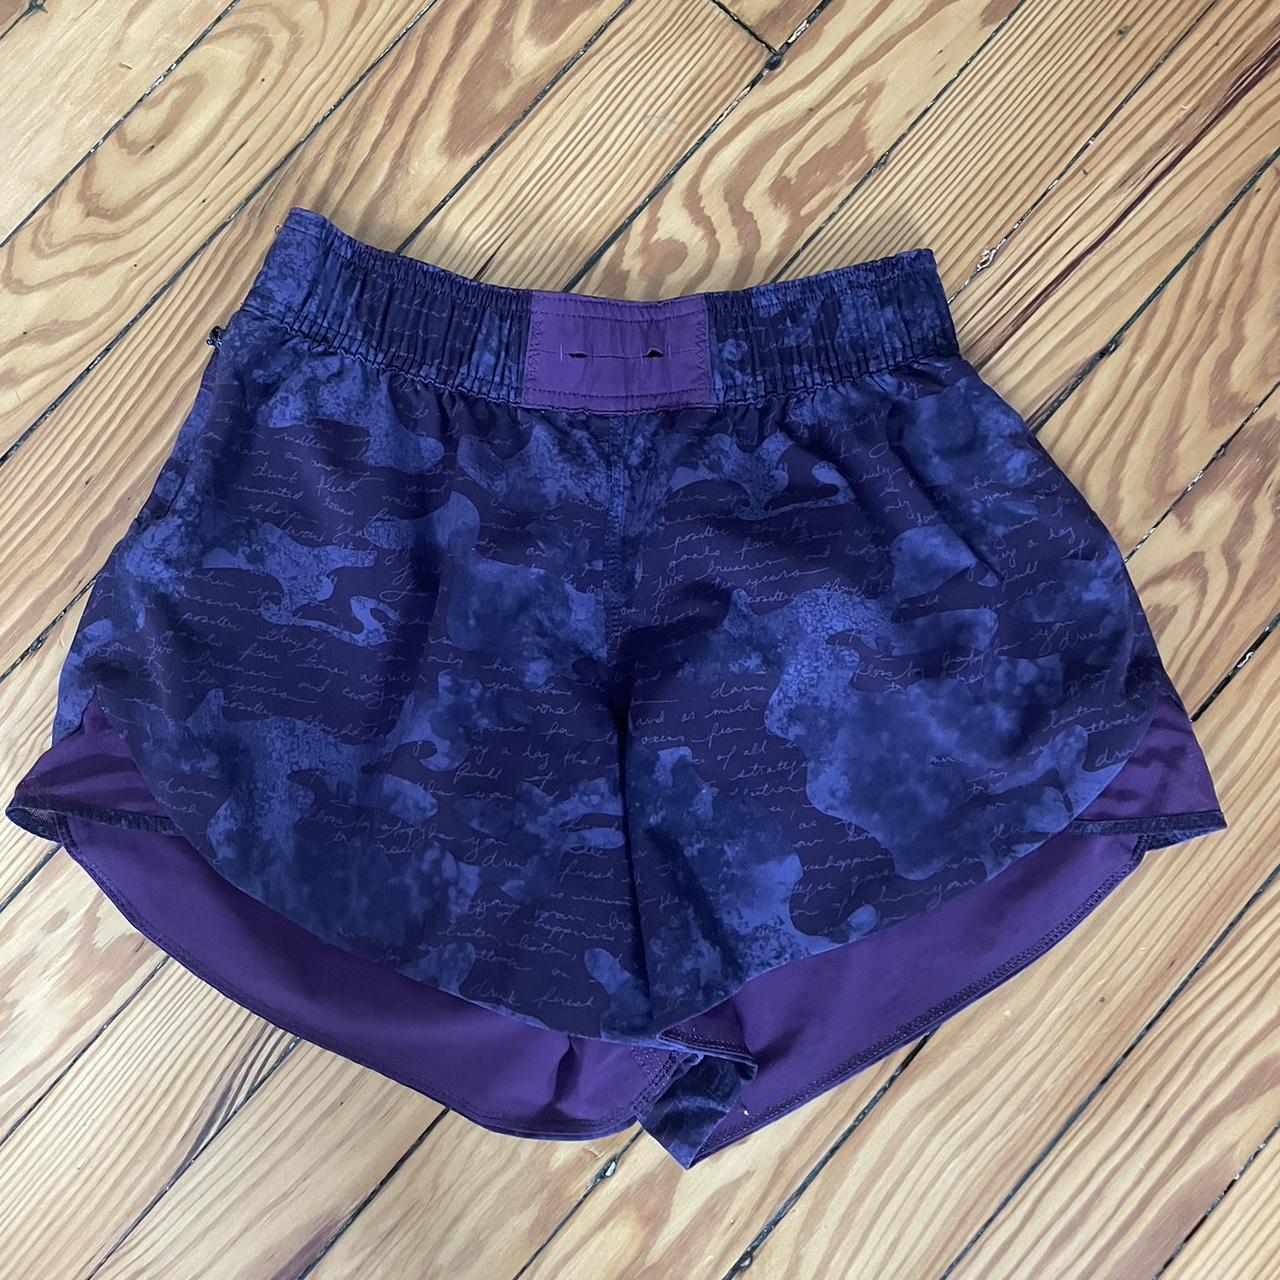 Lululemon Shorts Unlined! With mesh detail and - Depop